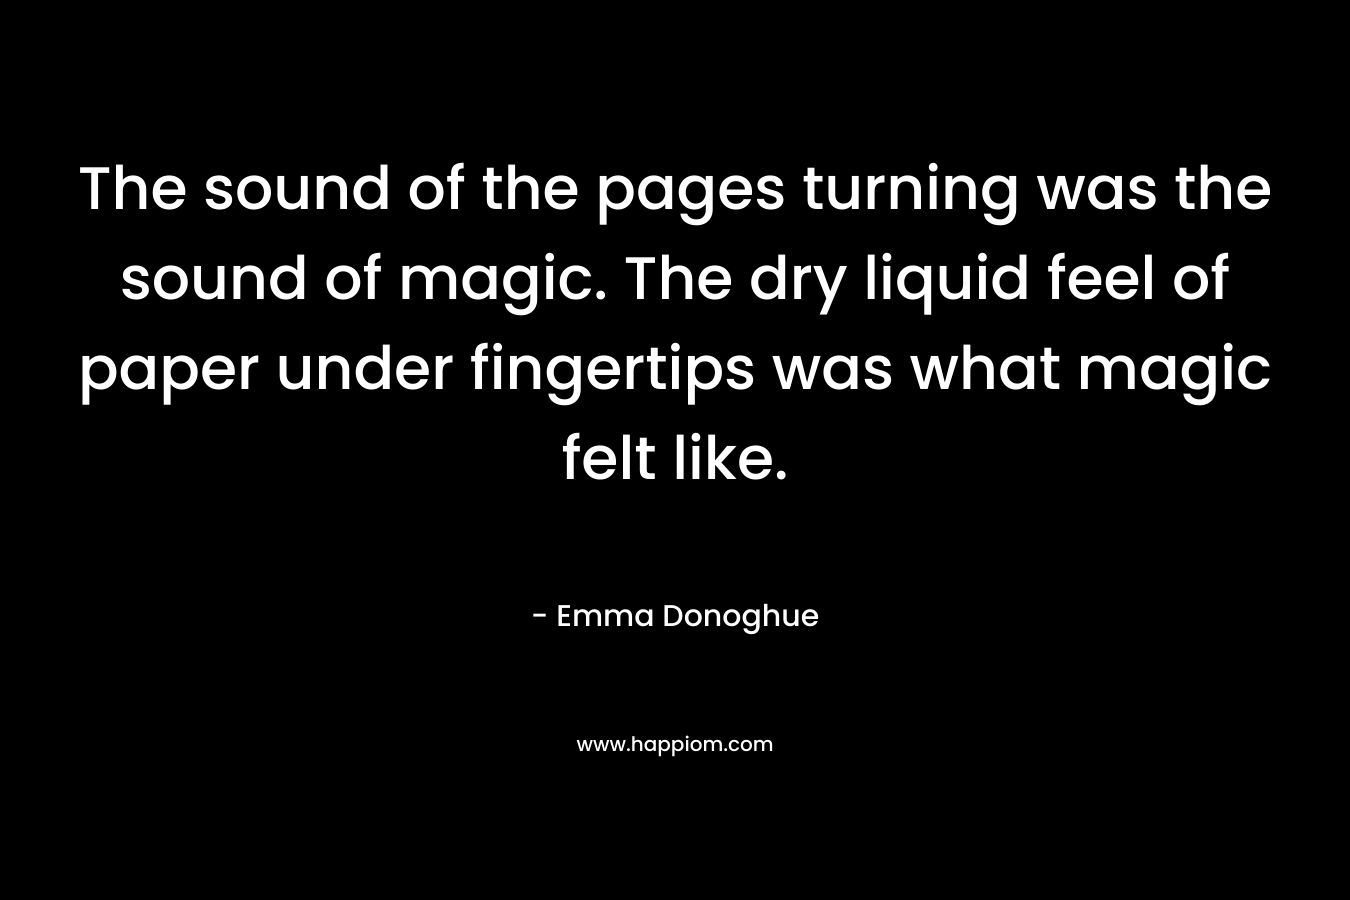 The sound of the pages turning was the sound of magic. The dry liquid feel of paper under fingertips was what magic felt like.